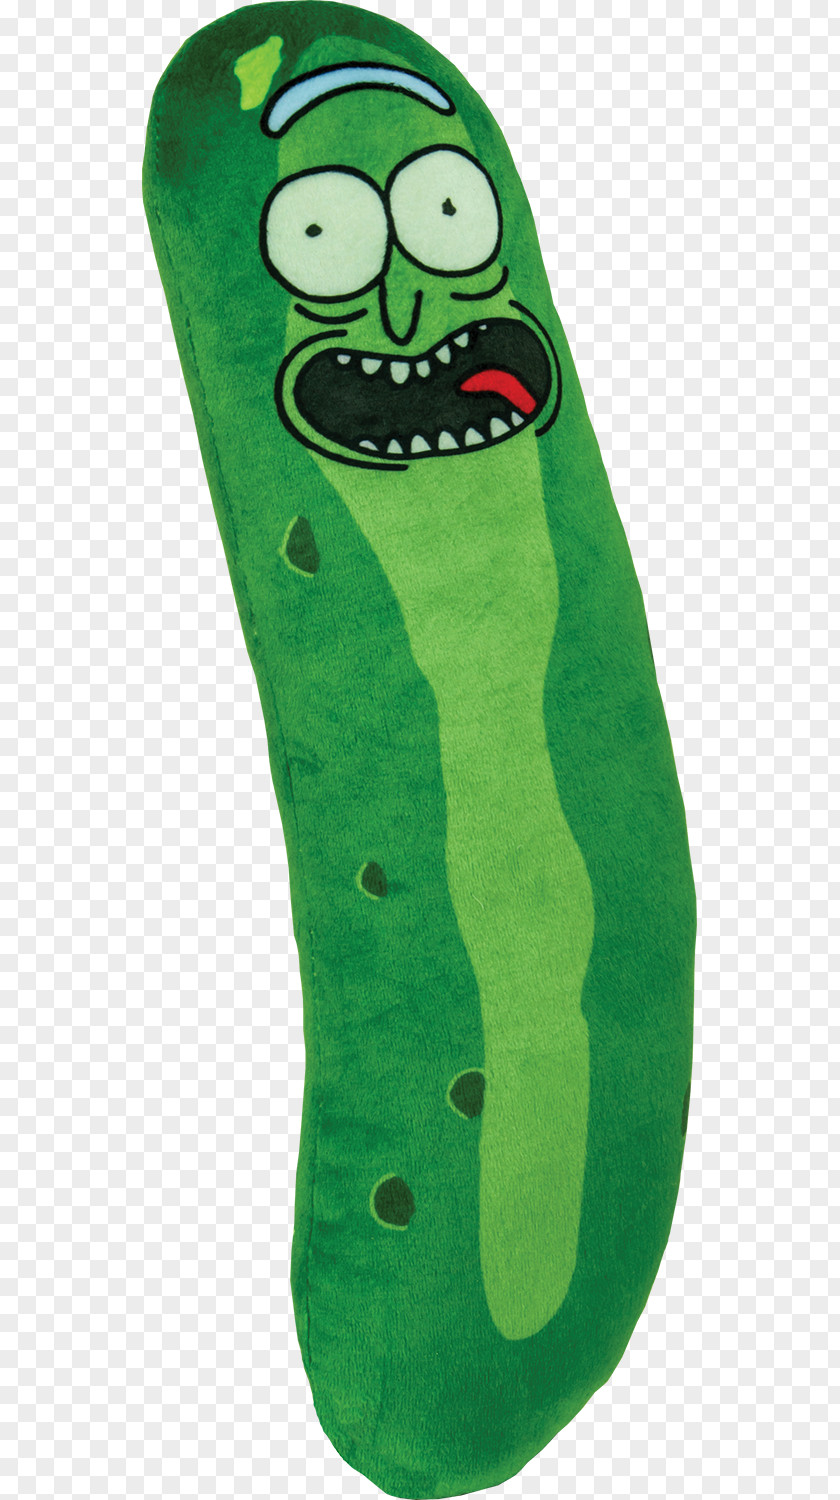 Rick And Morty Pickle Smith Pickled Cucumber Stuffed Animals & Cuddly Toys Plush PNG